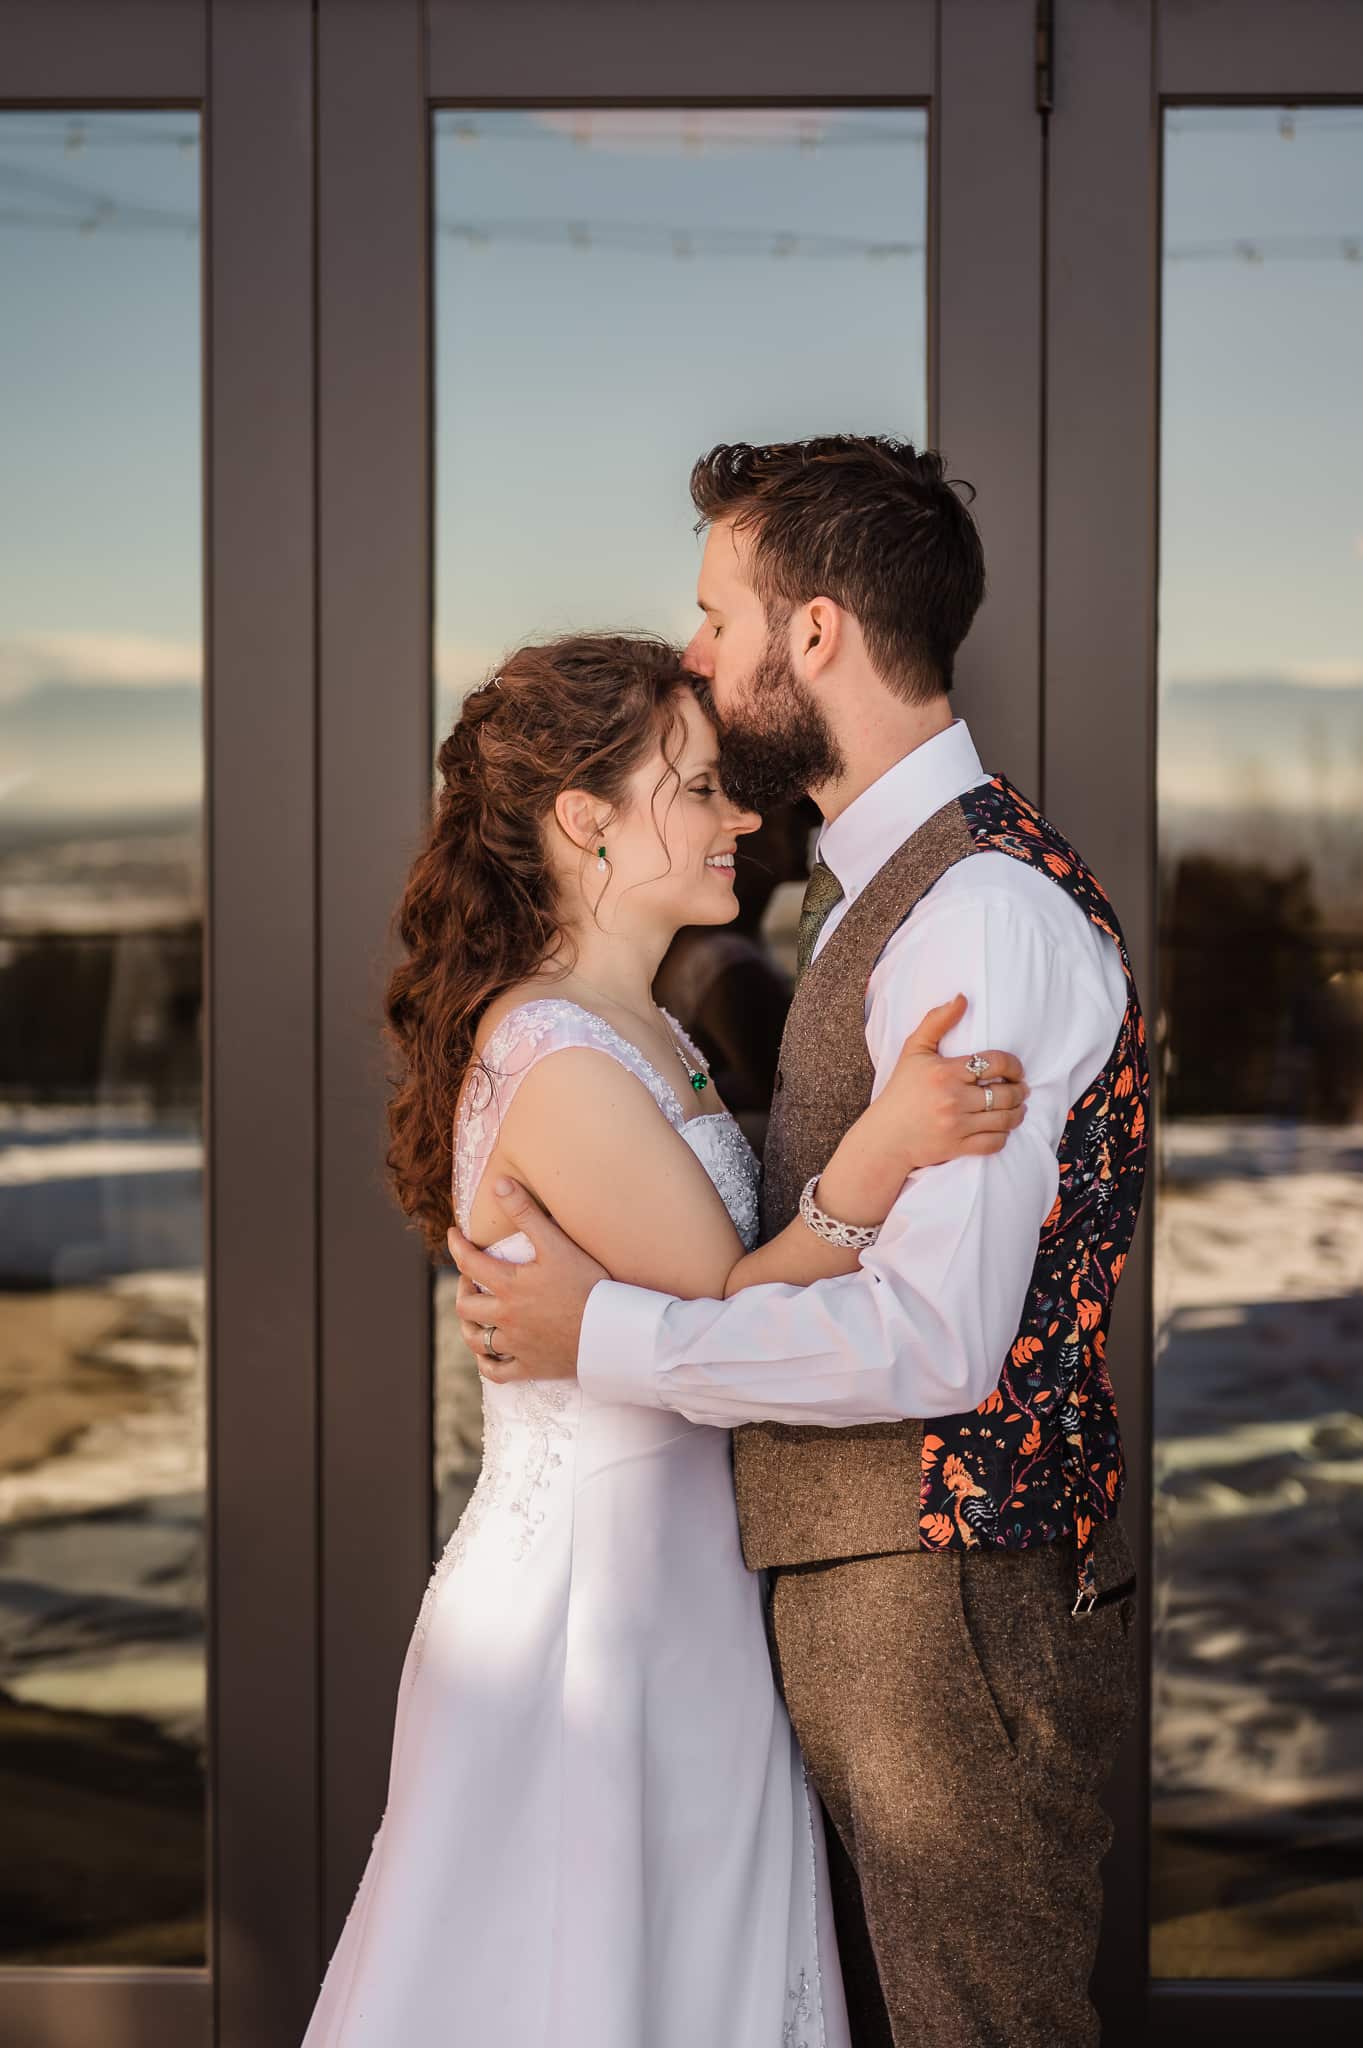 The bride and groom face and hold each other in front of reflective doors that mirror the mountains and warm light across the way to the west.